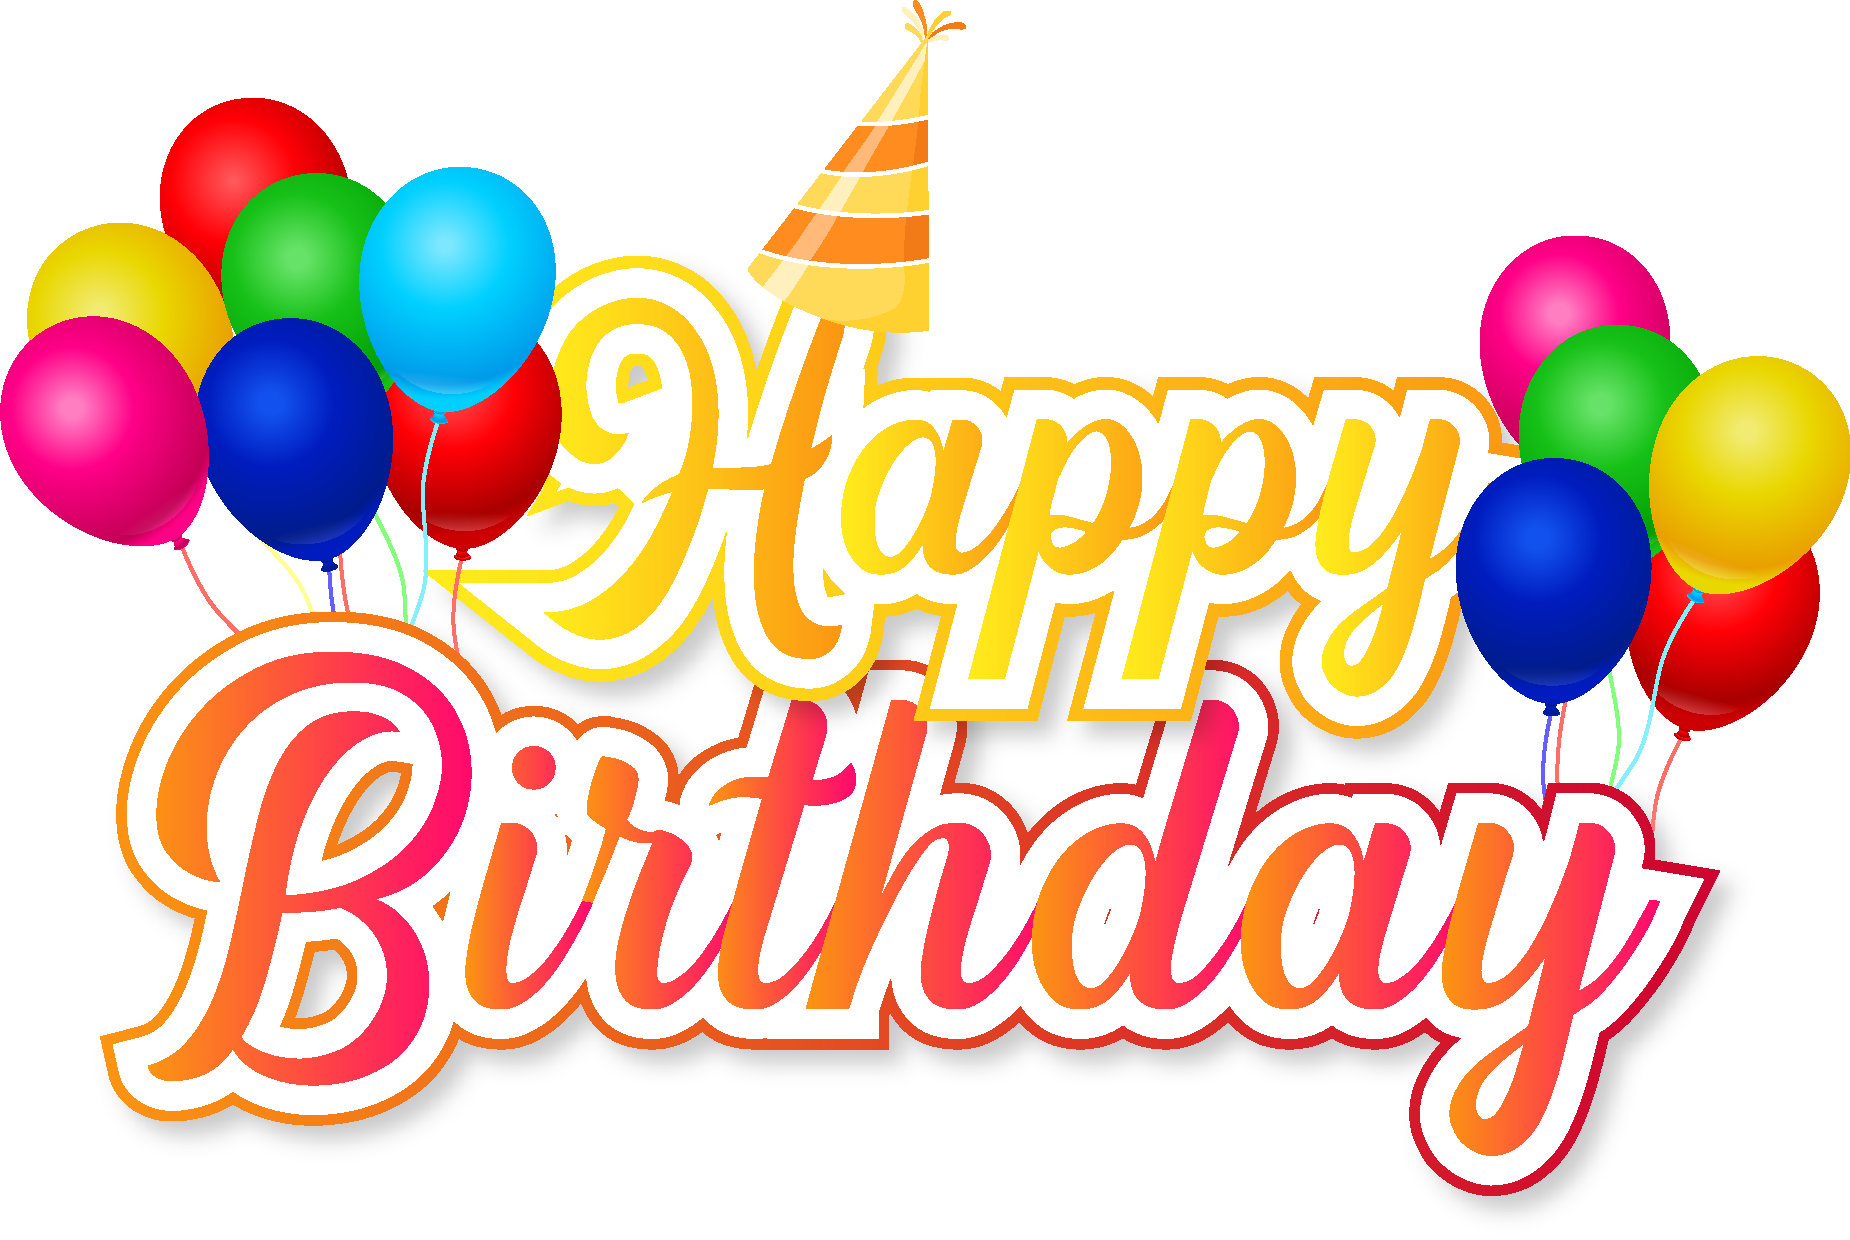 Happy Birthday Images PNG Image, Creative Happy Birthday Png Image, Red,  Colorfull, Gold Vector PNG Image For Free Download | Happy birthday png, Happy  birthday design, Happy birthday images